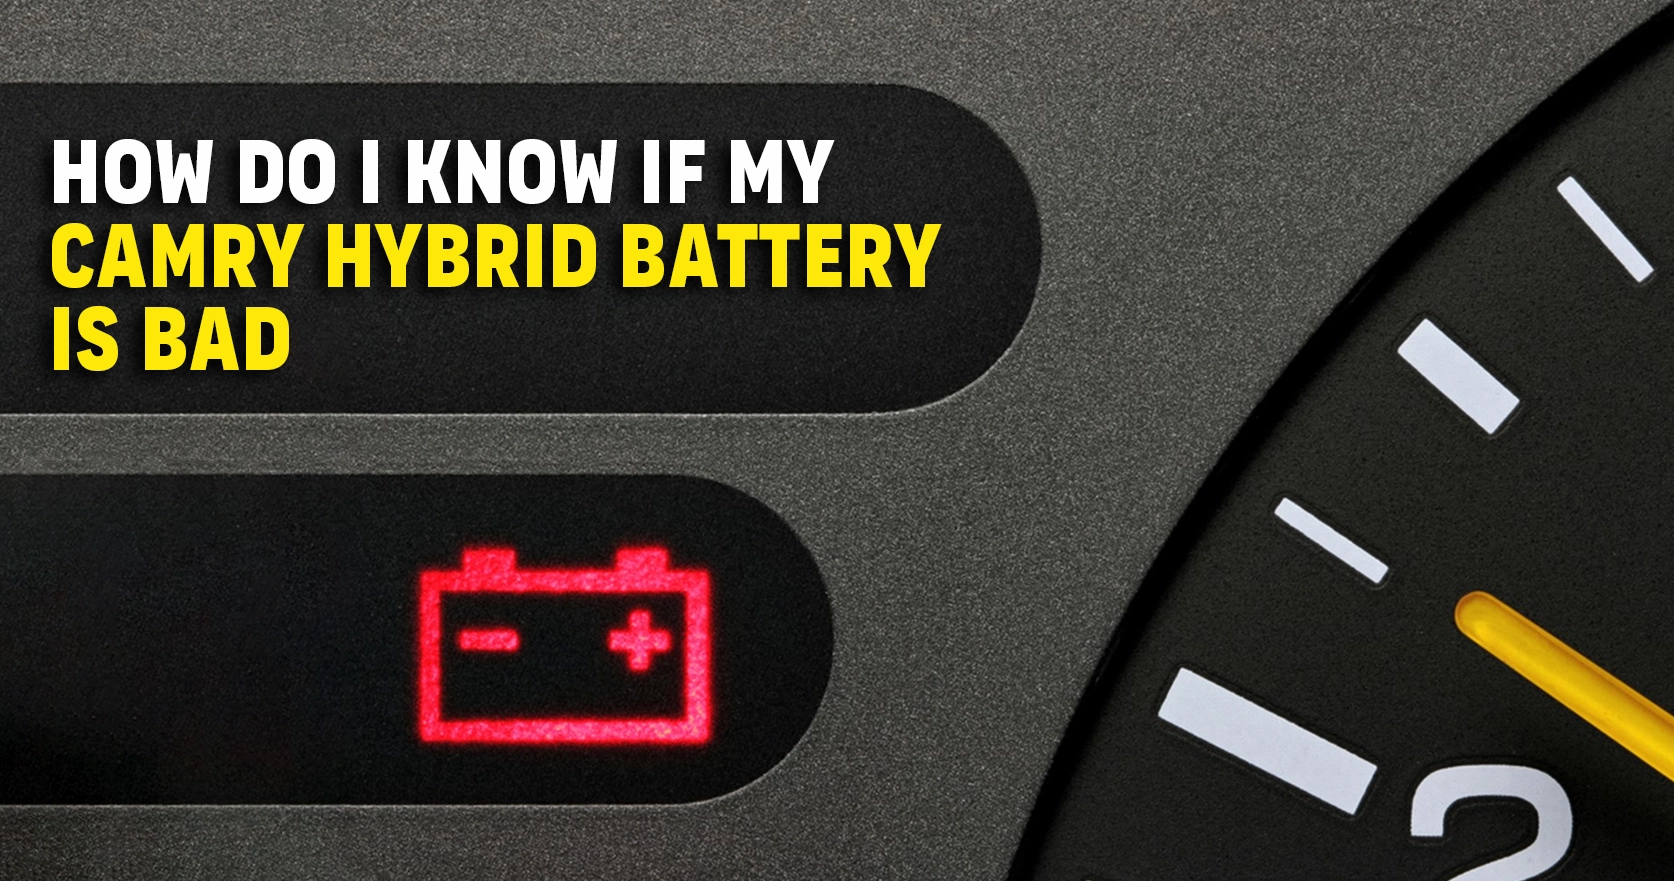 How Do I Know If My Camry Hybrid Battery Is Bad?